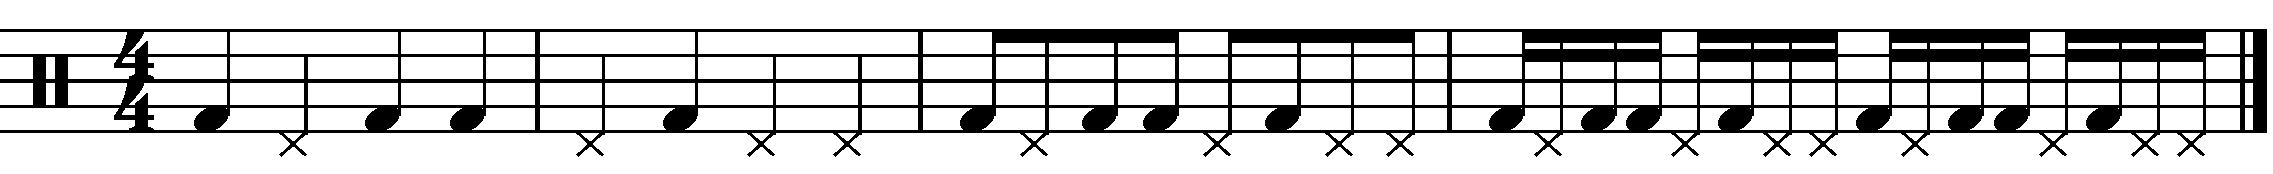 The paradiddle exercise.